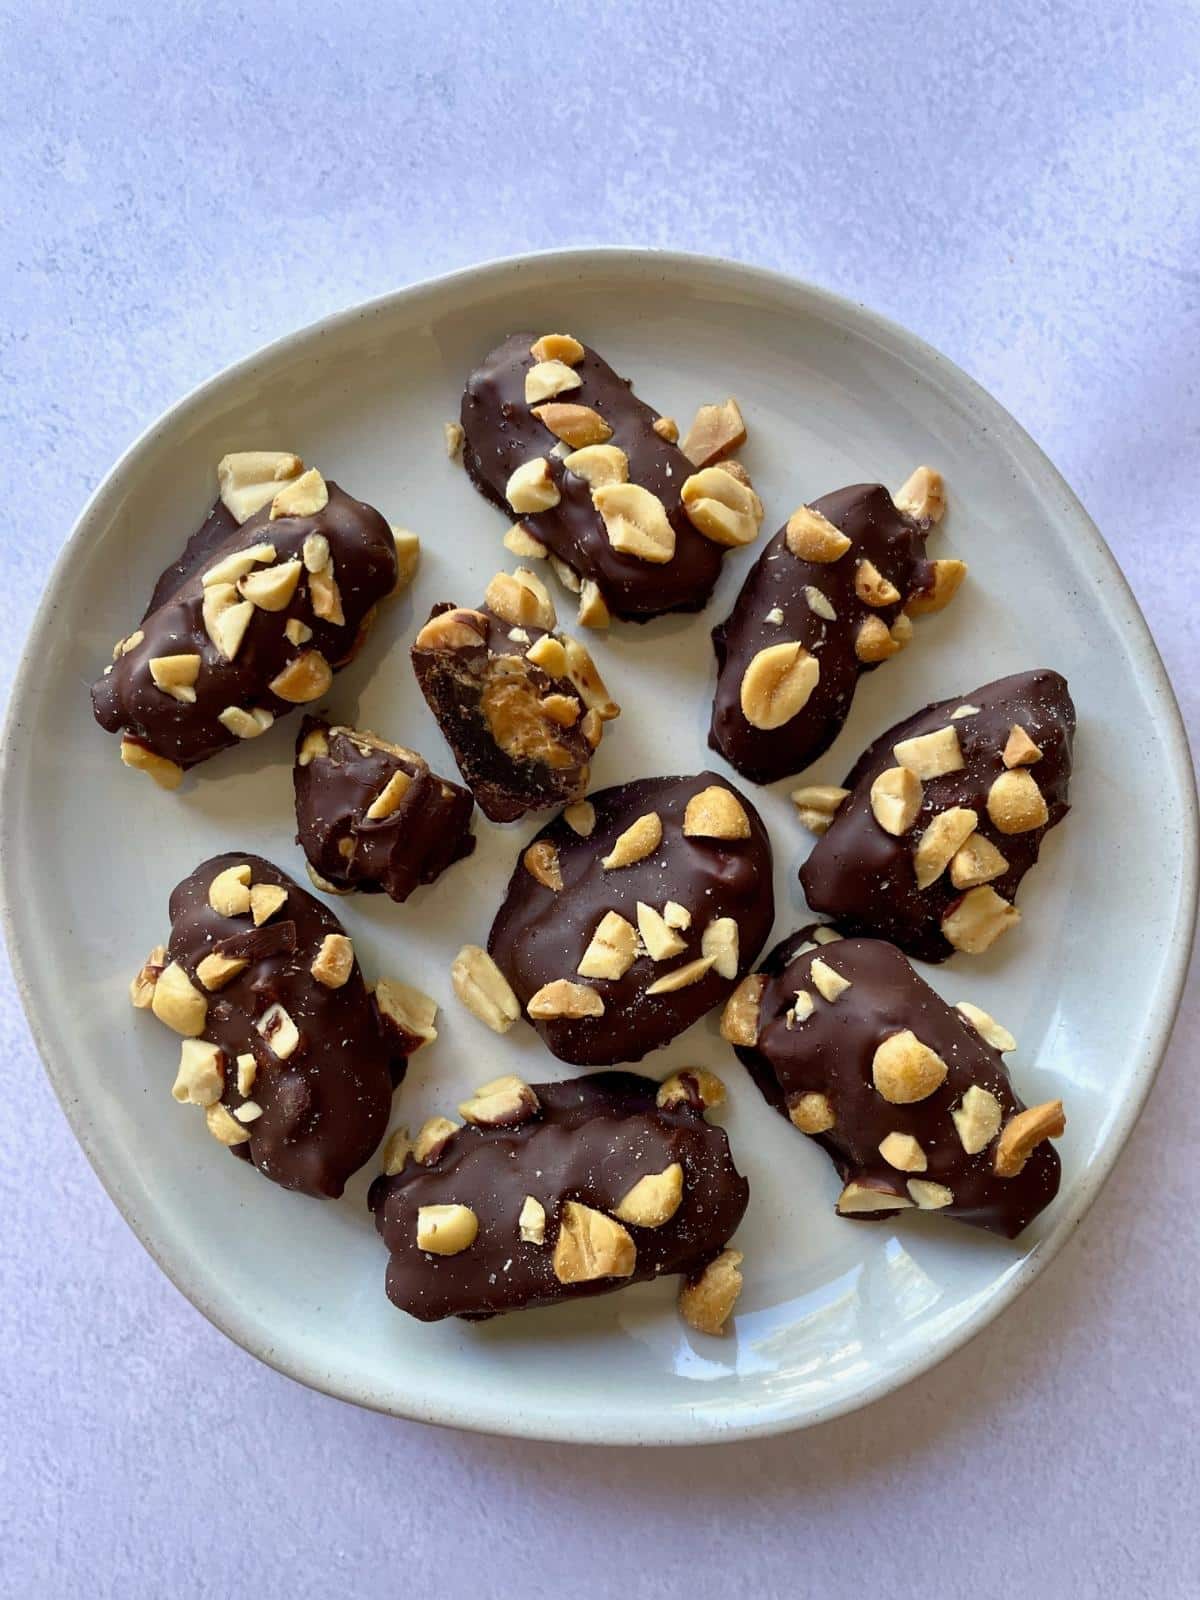 Snickers dates with peanuts.